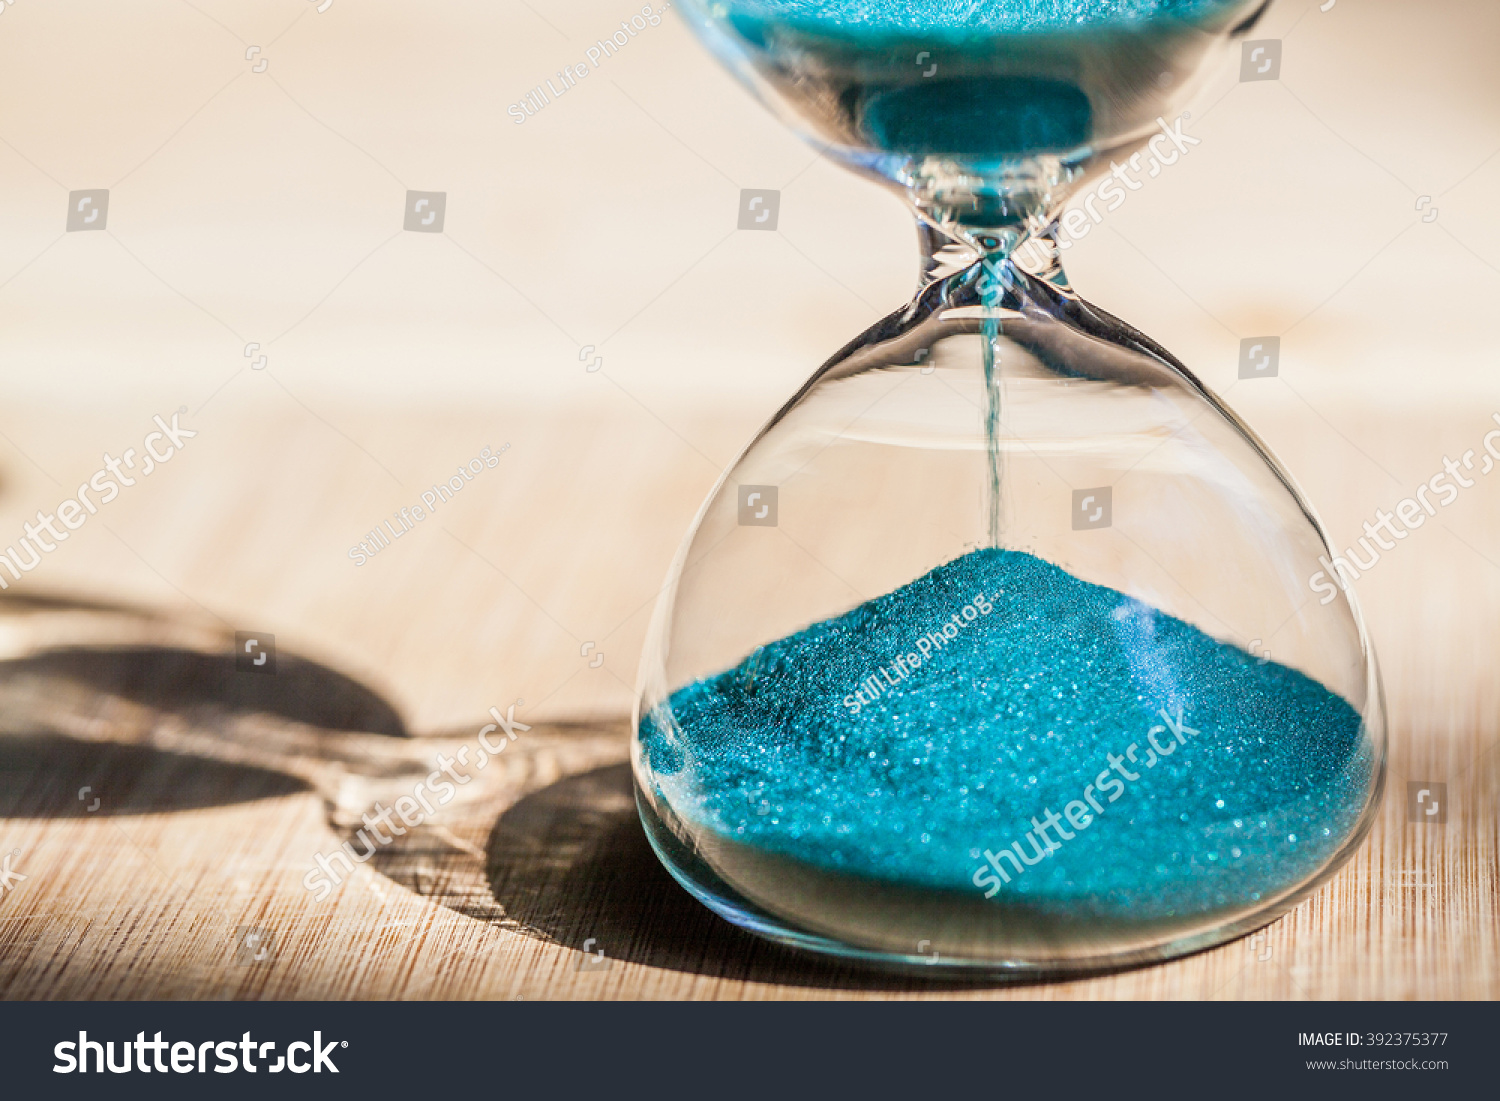 Sand Running Through The Bulbs Of An Hourglass Measuring The Passing Time In A ...